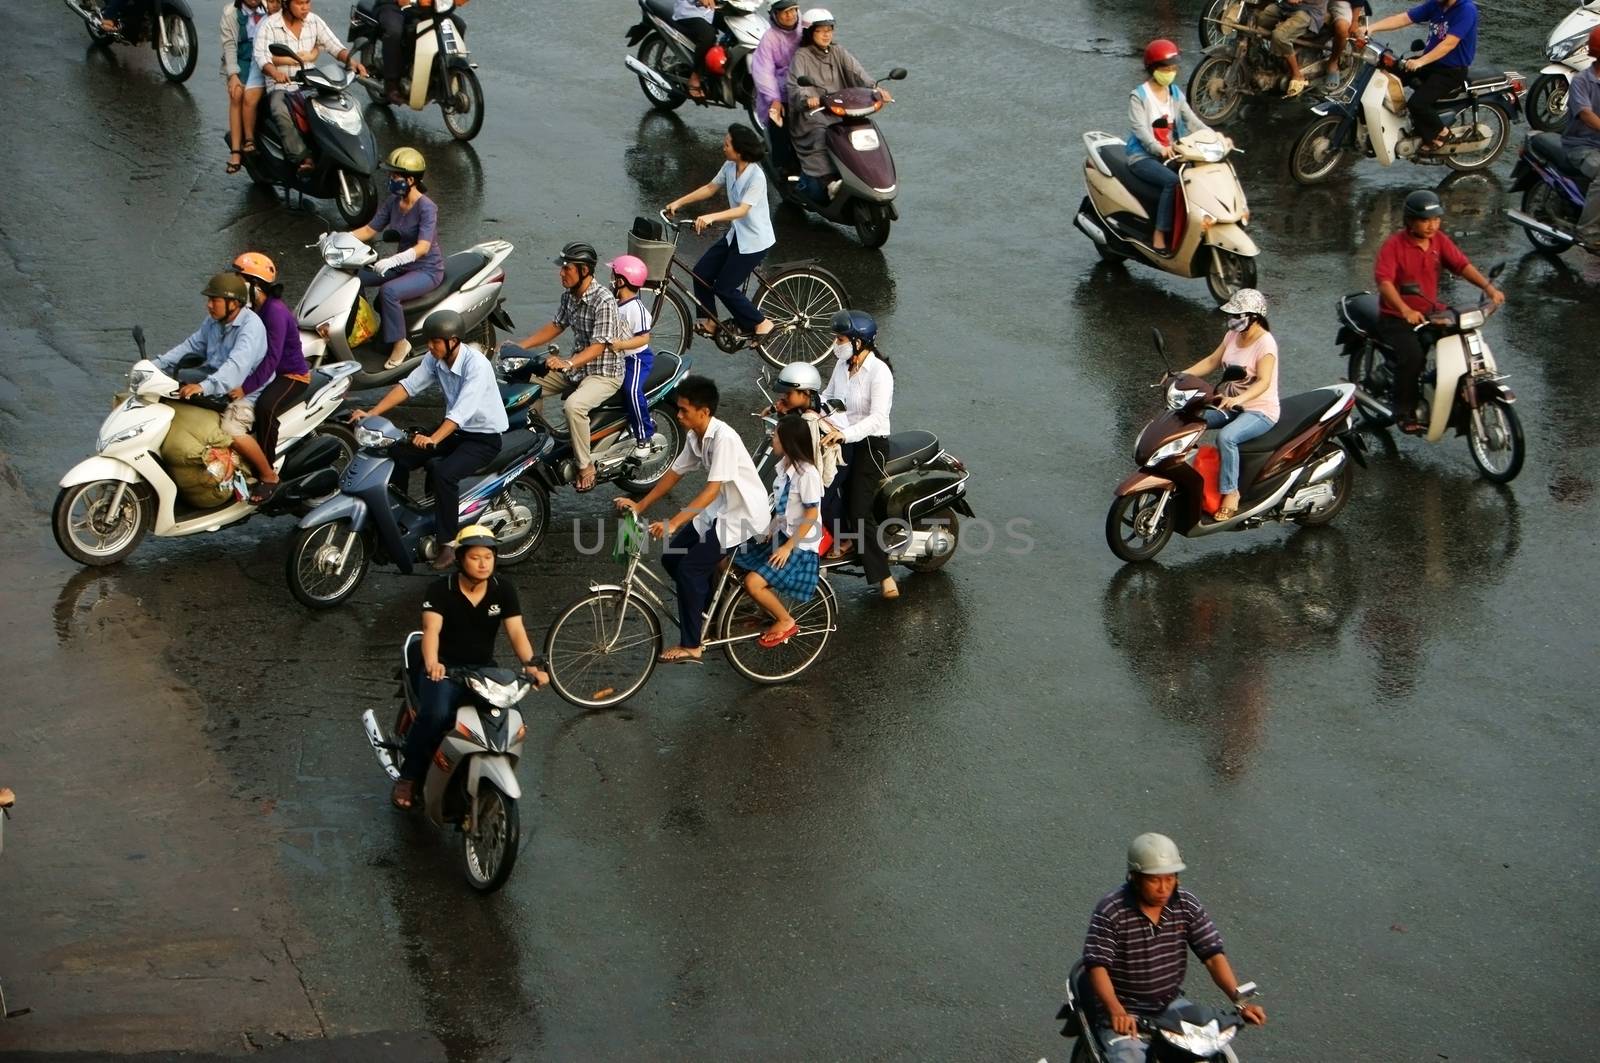 Crowd of people ride motorcycle in rush hour by xuanhuongho